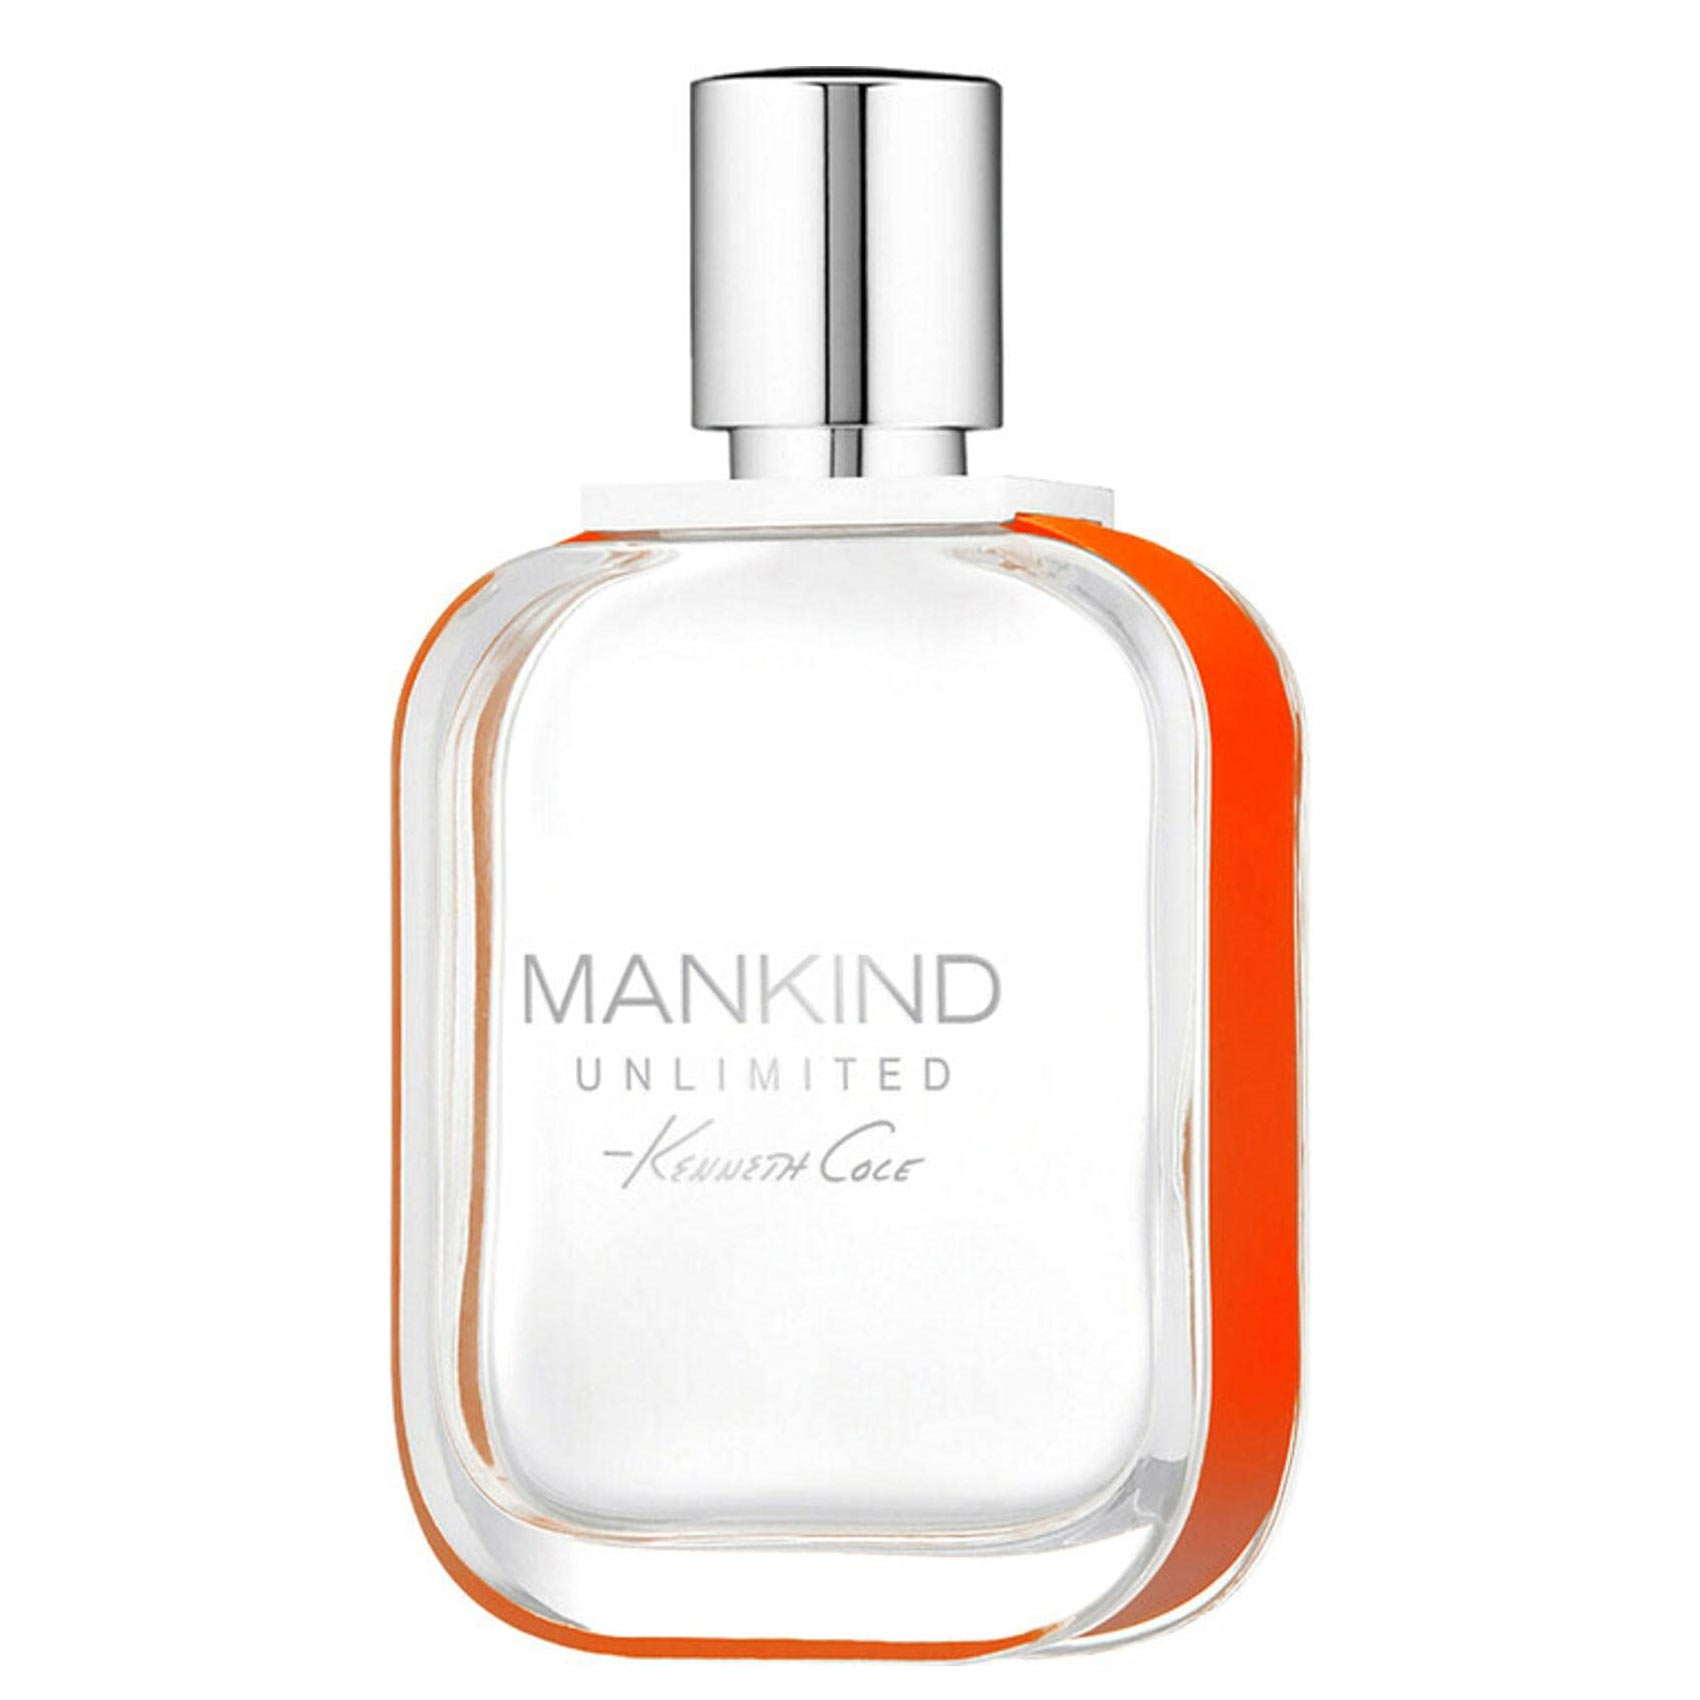 Mankind-Unlimited-Kenneth-Cole